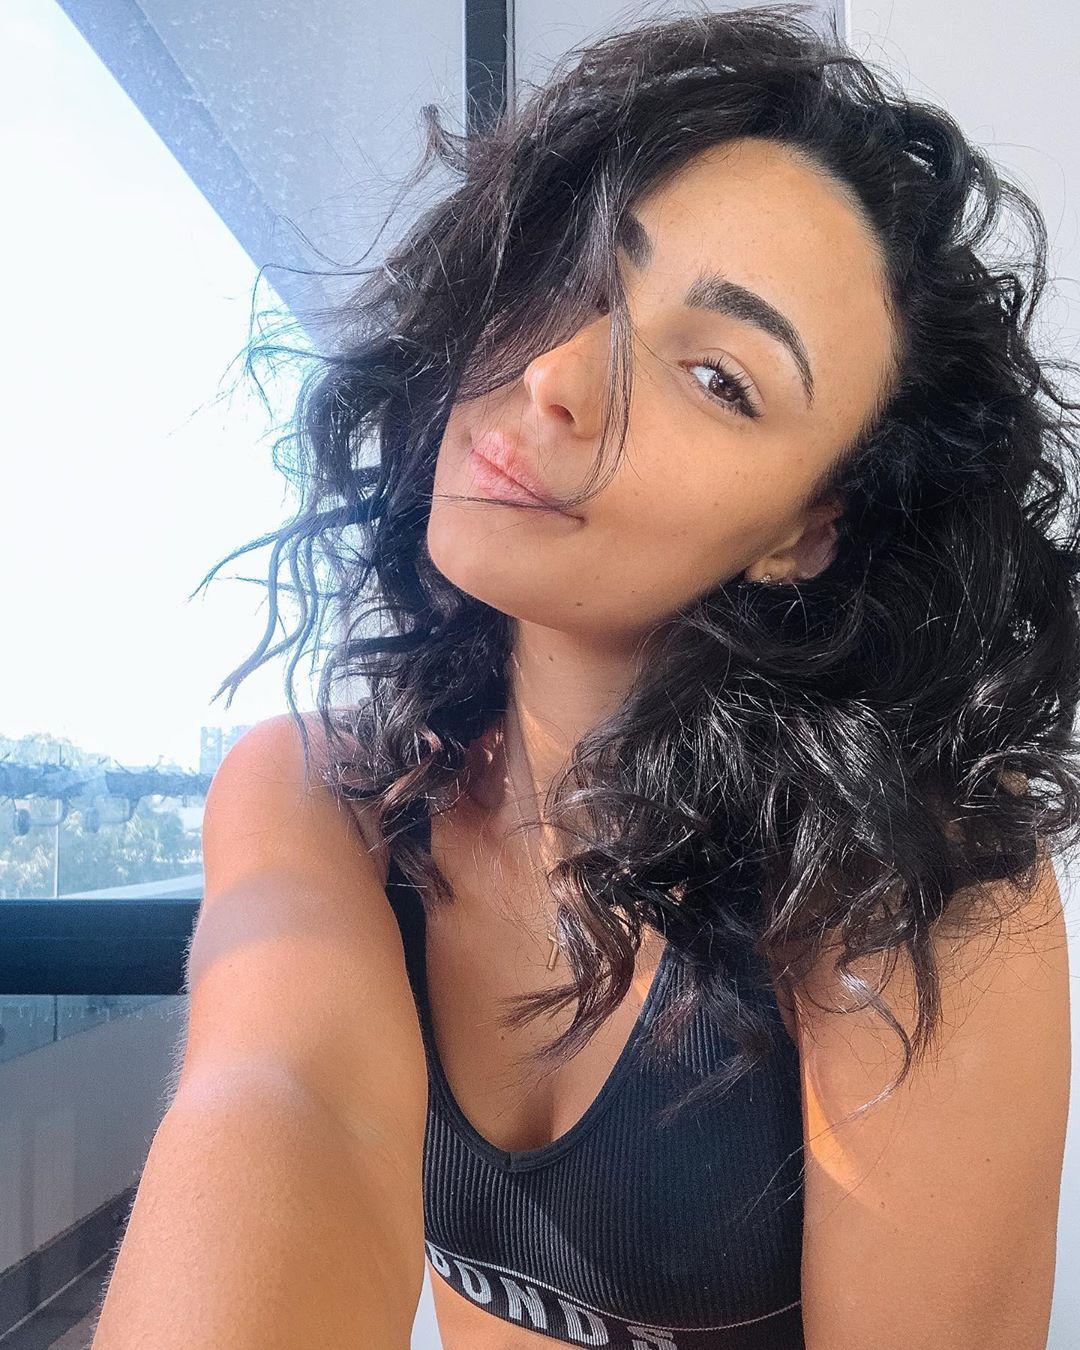 51 Hot Pictures Of Tayla Damir Are Simply Excessively Damn Delectable 21